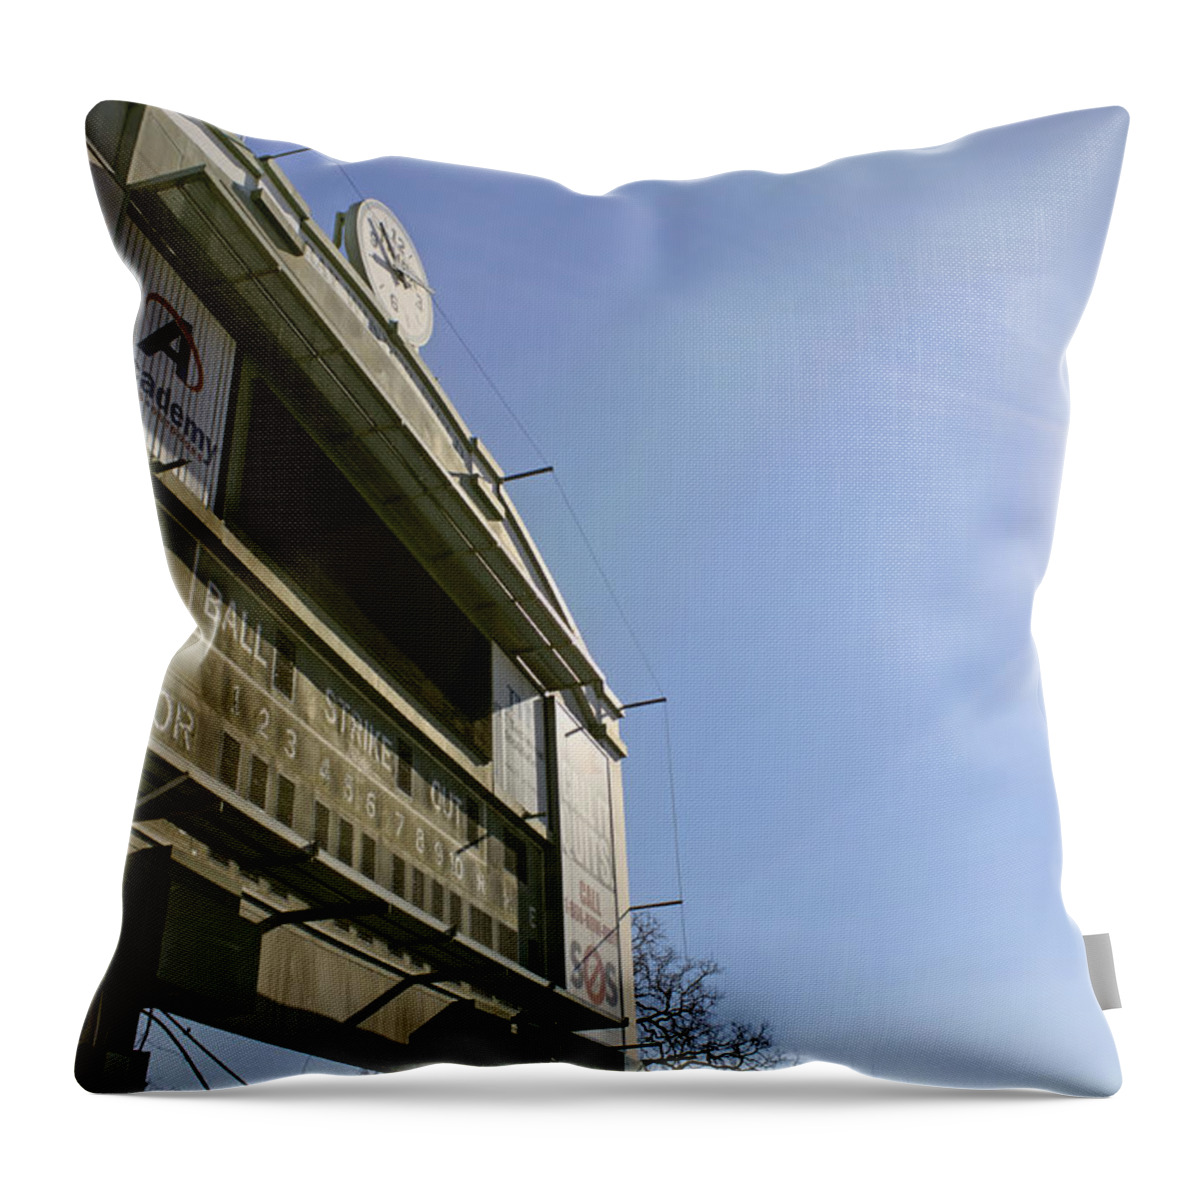 Baseball Throw Pillow featuring the photograph All That Remains of Ray Winder Field by Jason Politte